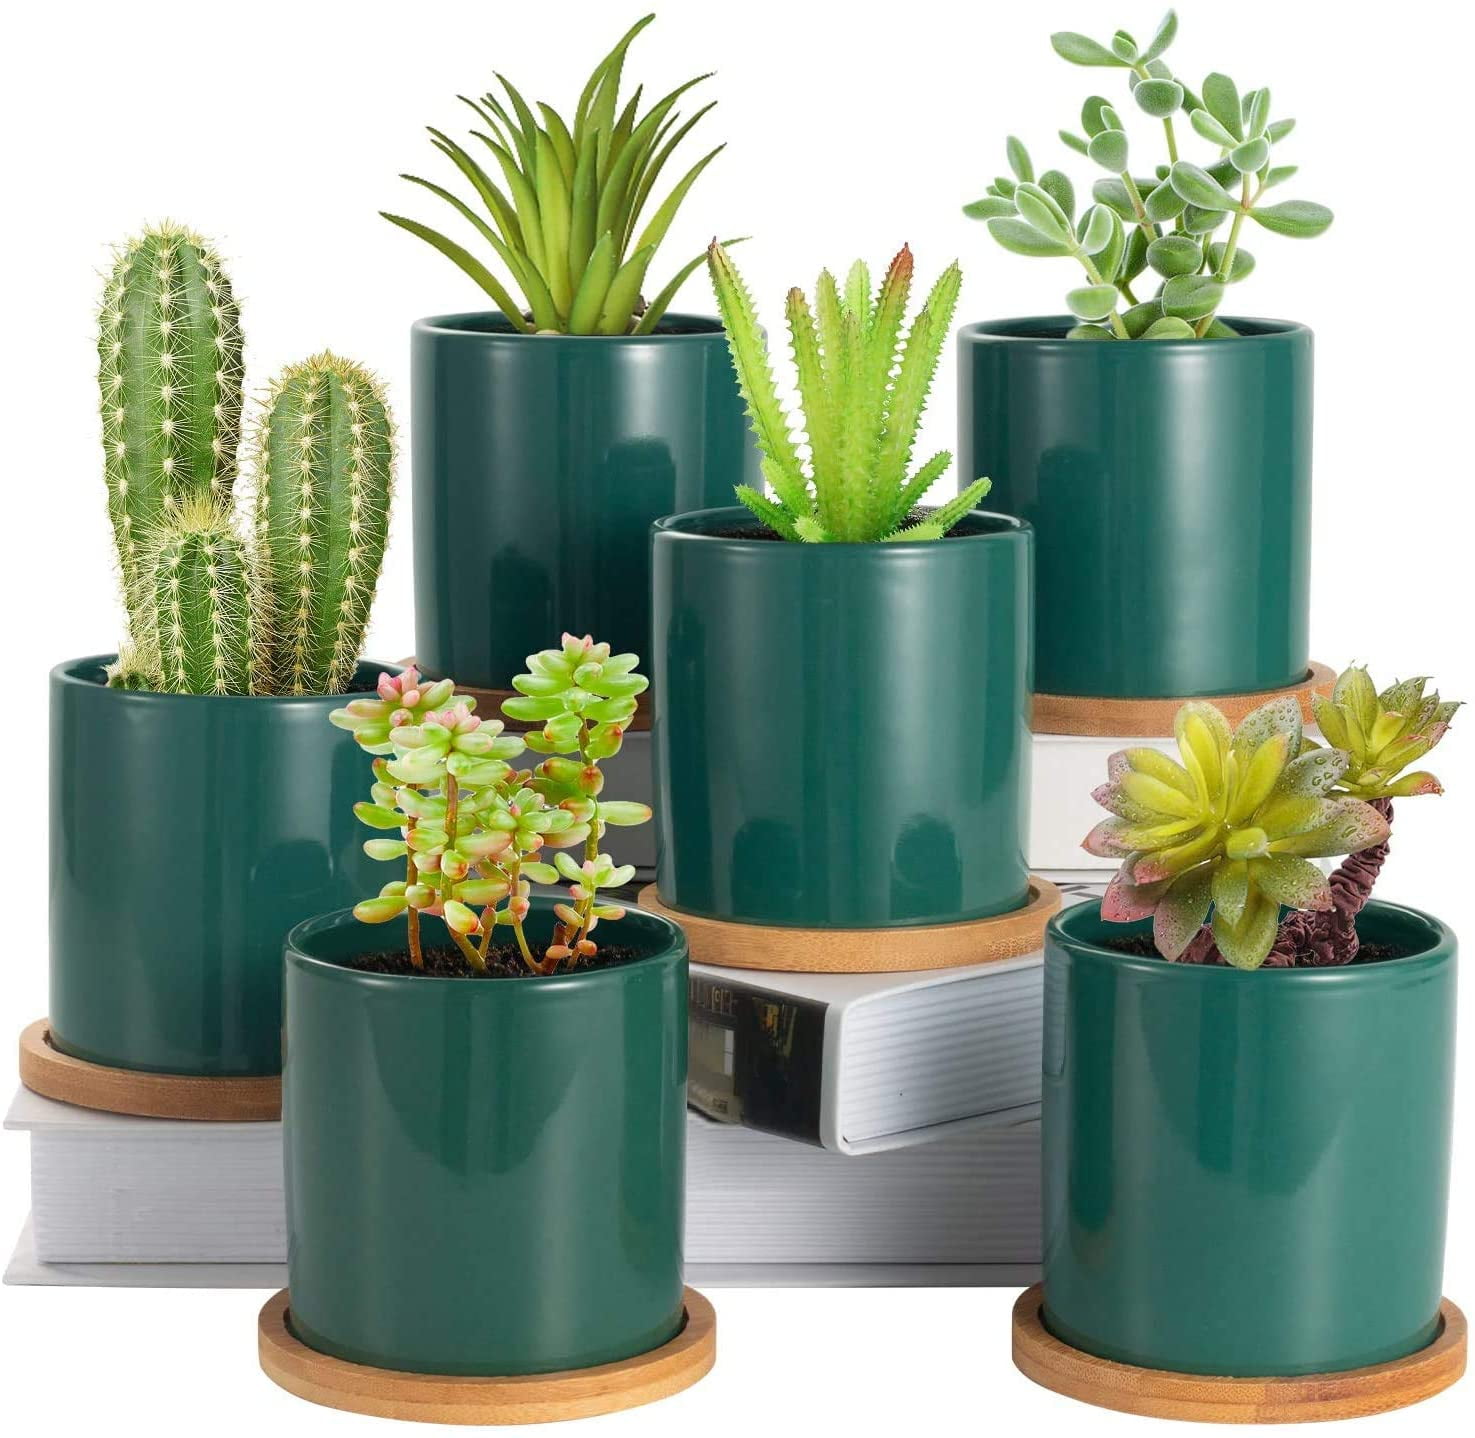 EFISPSS Succulent Plant Pots 3.2 inch Ceramic Flower Pot with Bamboo Tray 6 Pack Blue Plants NOT Included Small Cactus Planter Pots with Drainage Holes for House Office Decor and Gift 